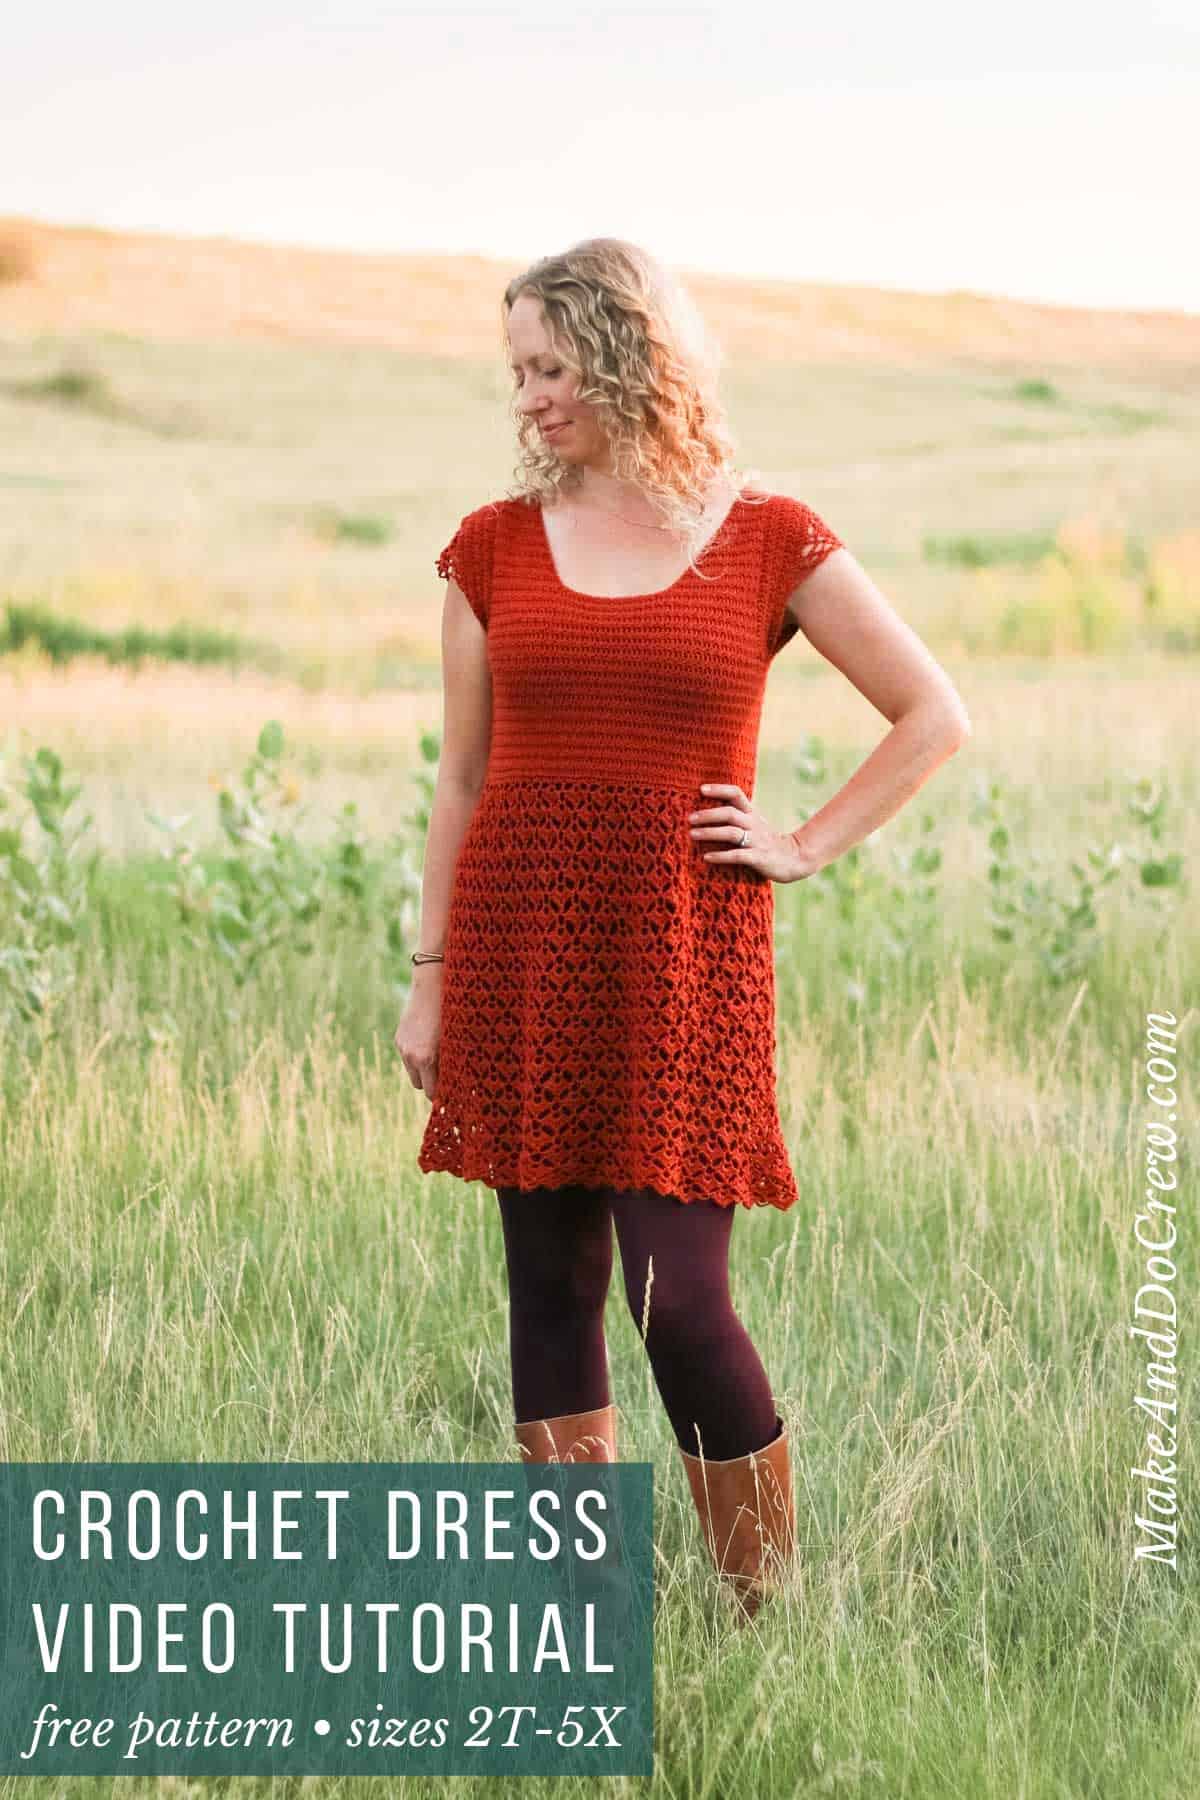 This ladies crochet dress pattern makes a perfect sundress with simple-to-work lace and delicate cap sleeves. Includes video tutorial.